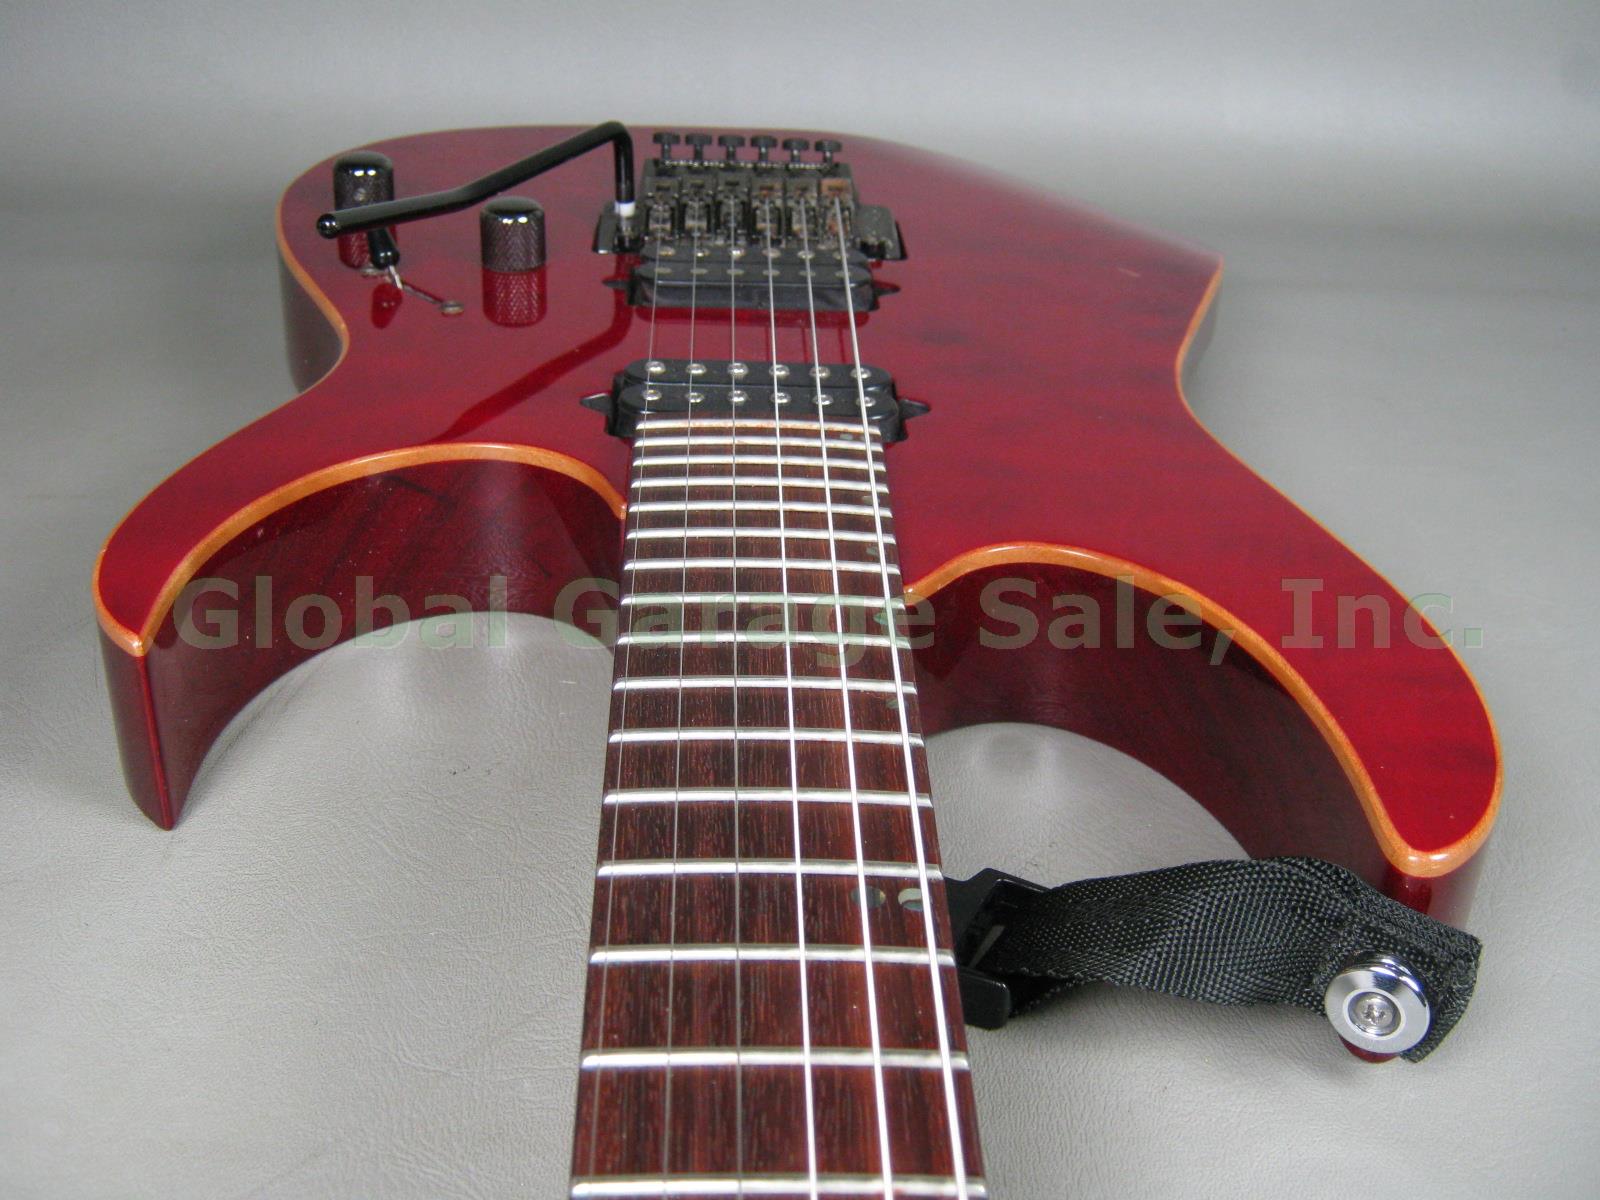 1998 Ibanez Prestige RG3120 Electric Guitar Red Quilted Maple Floyd Rose Tremolo 5